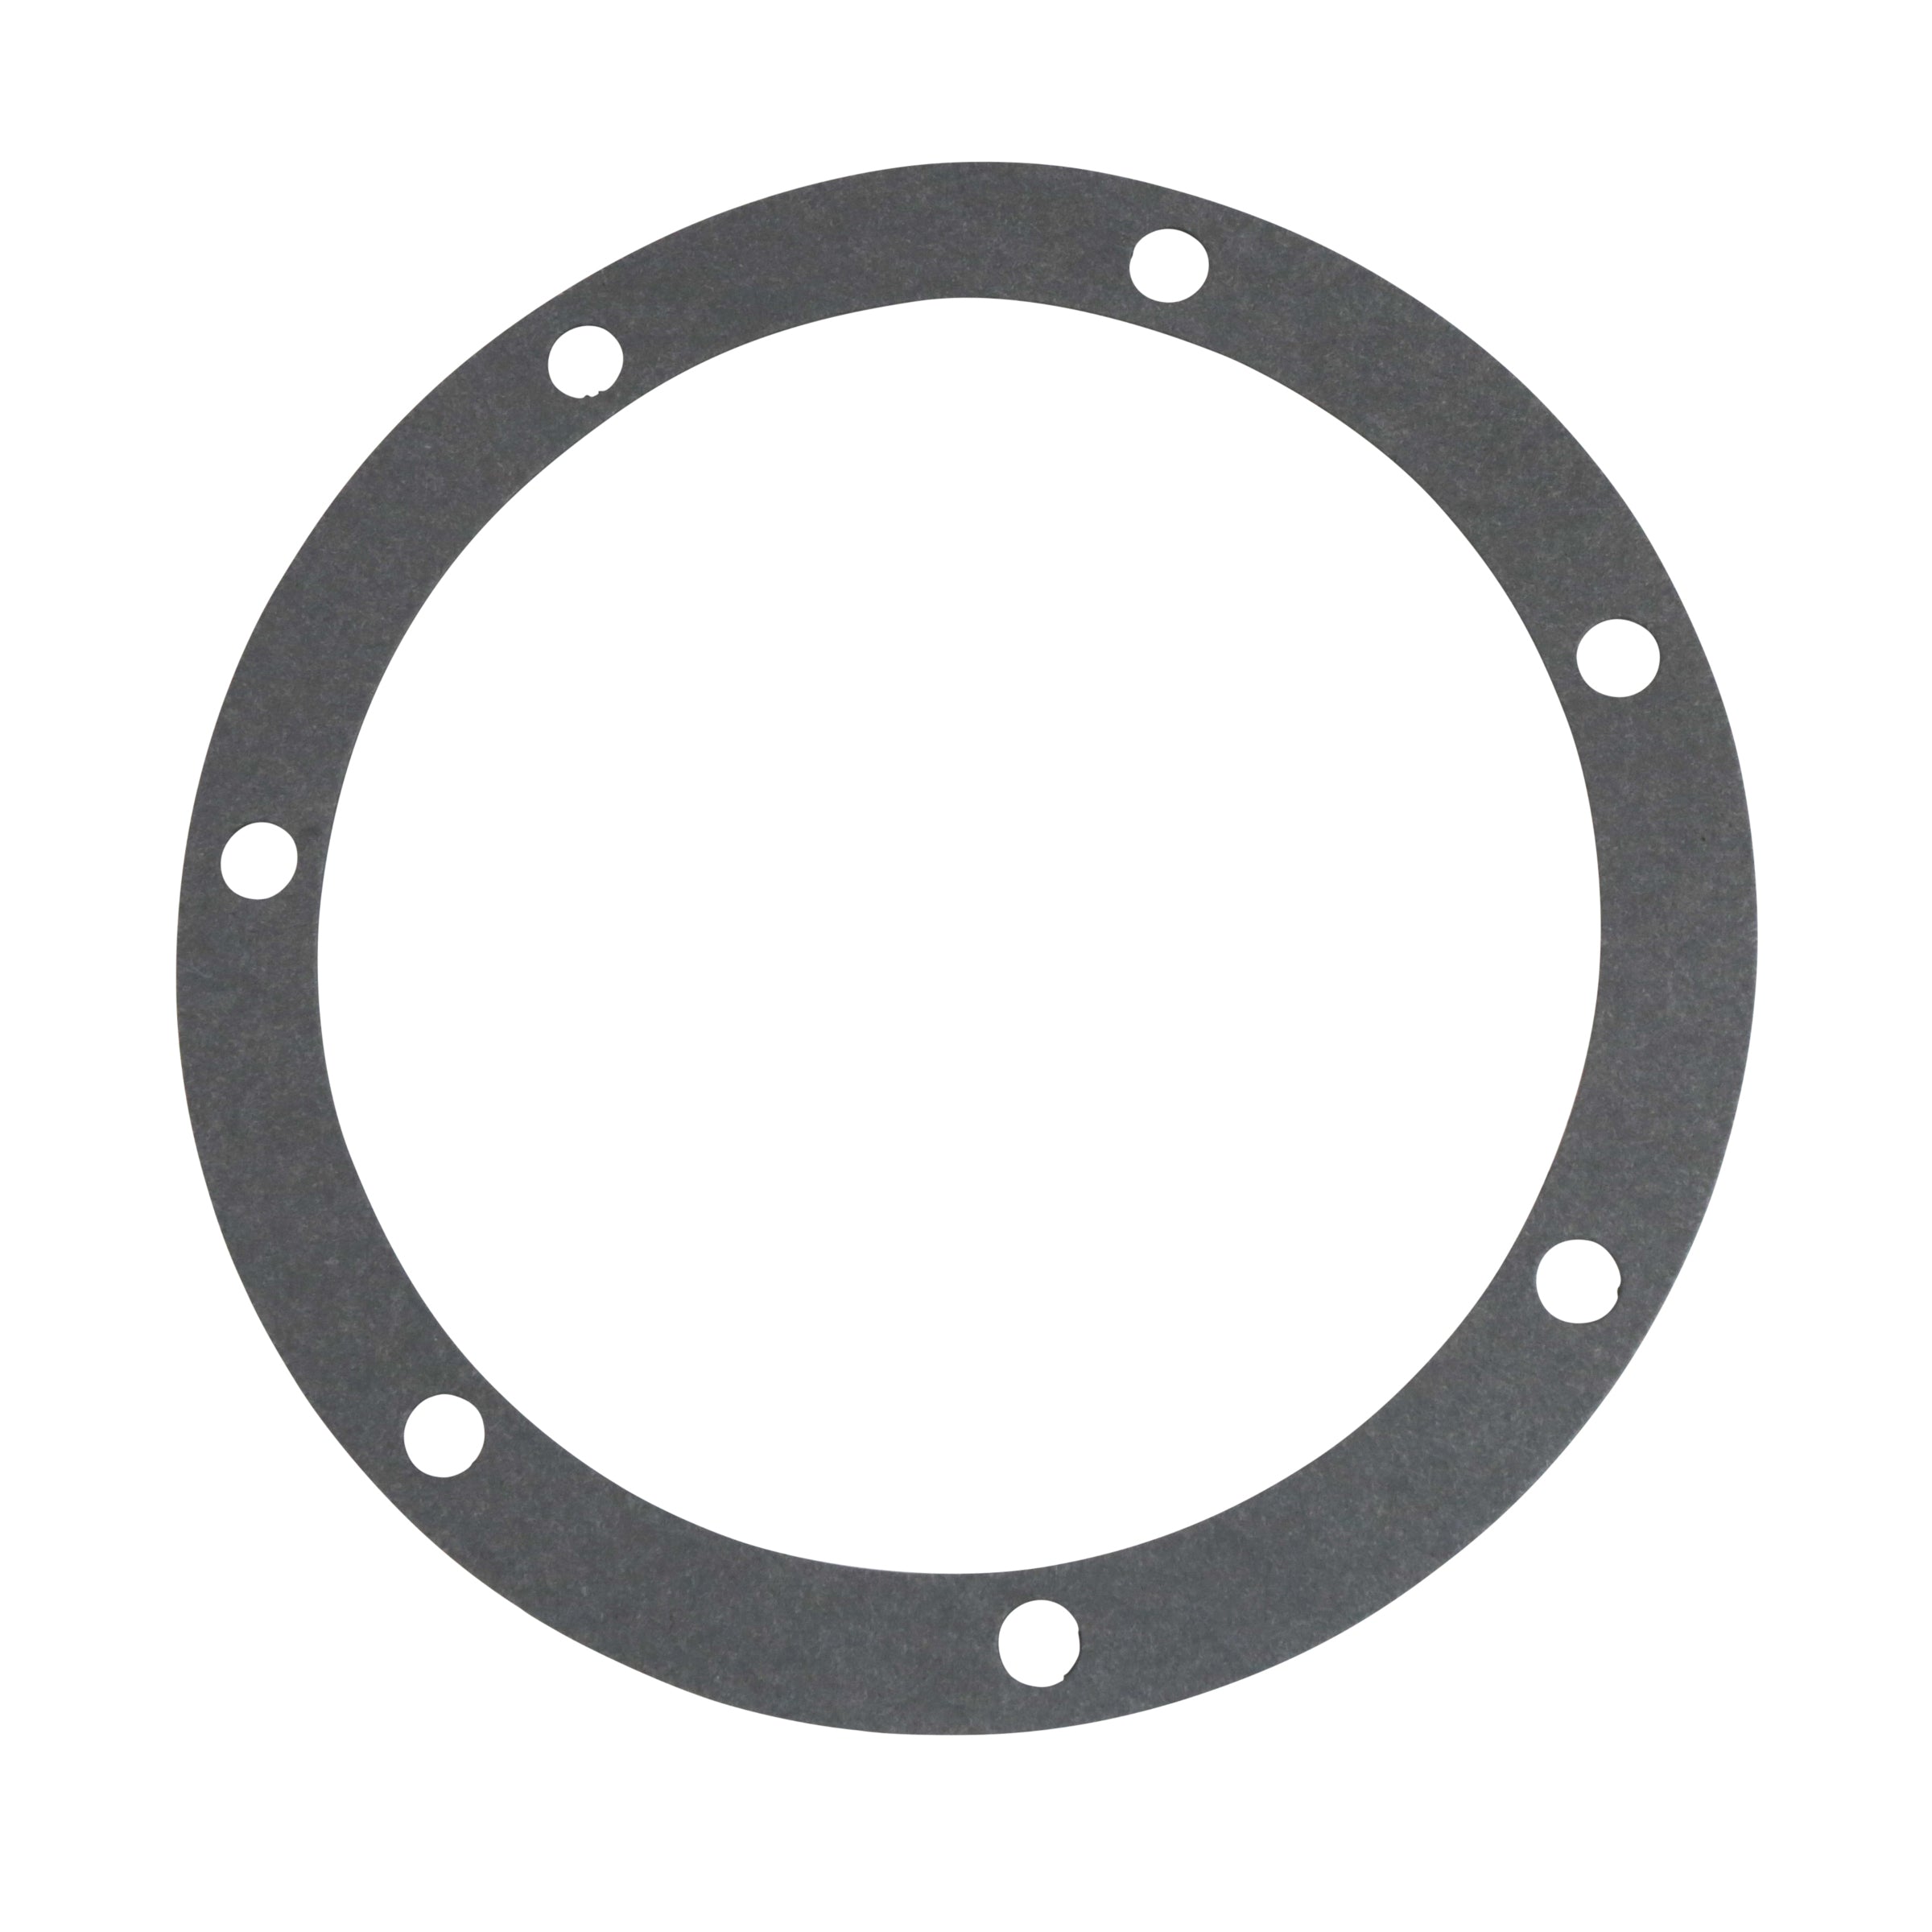 Oil Pan Plate Clean-Out Gasket • 1948-52 Ford Passenger & Truck V-8 & 6 Cylinder